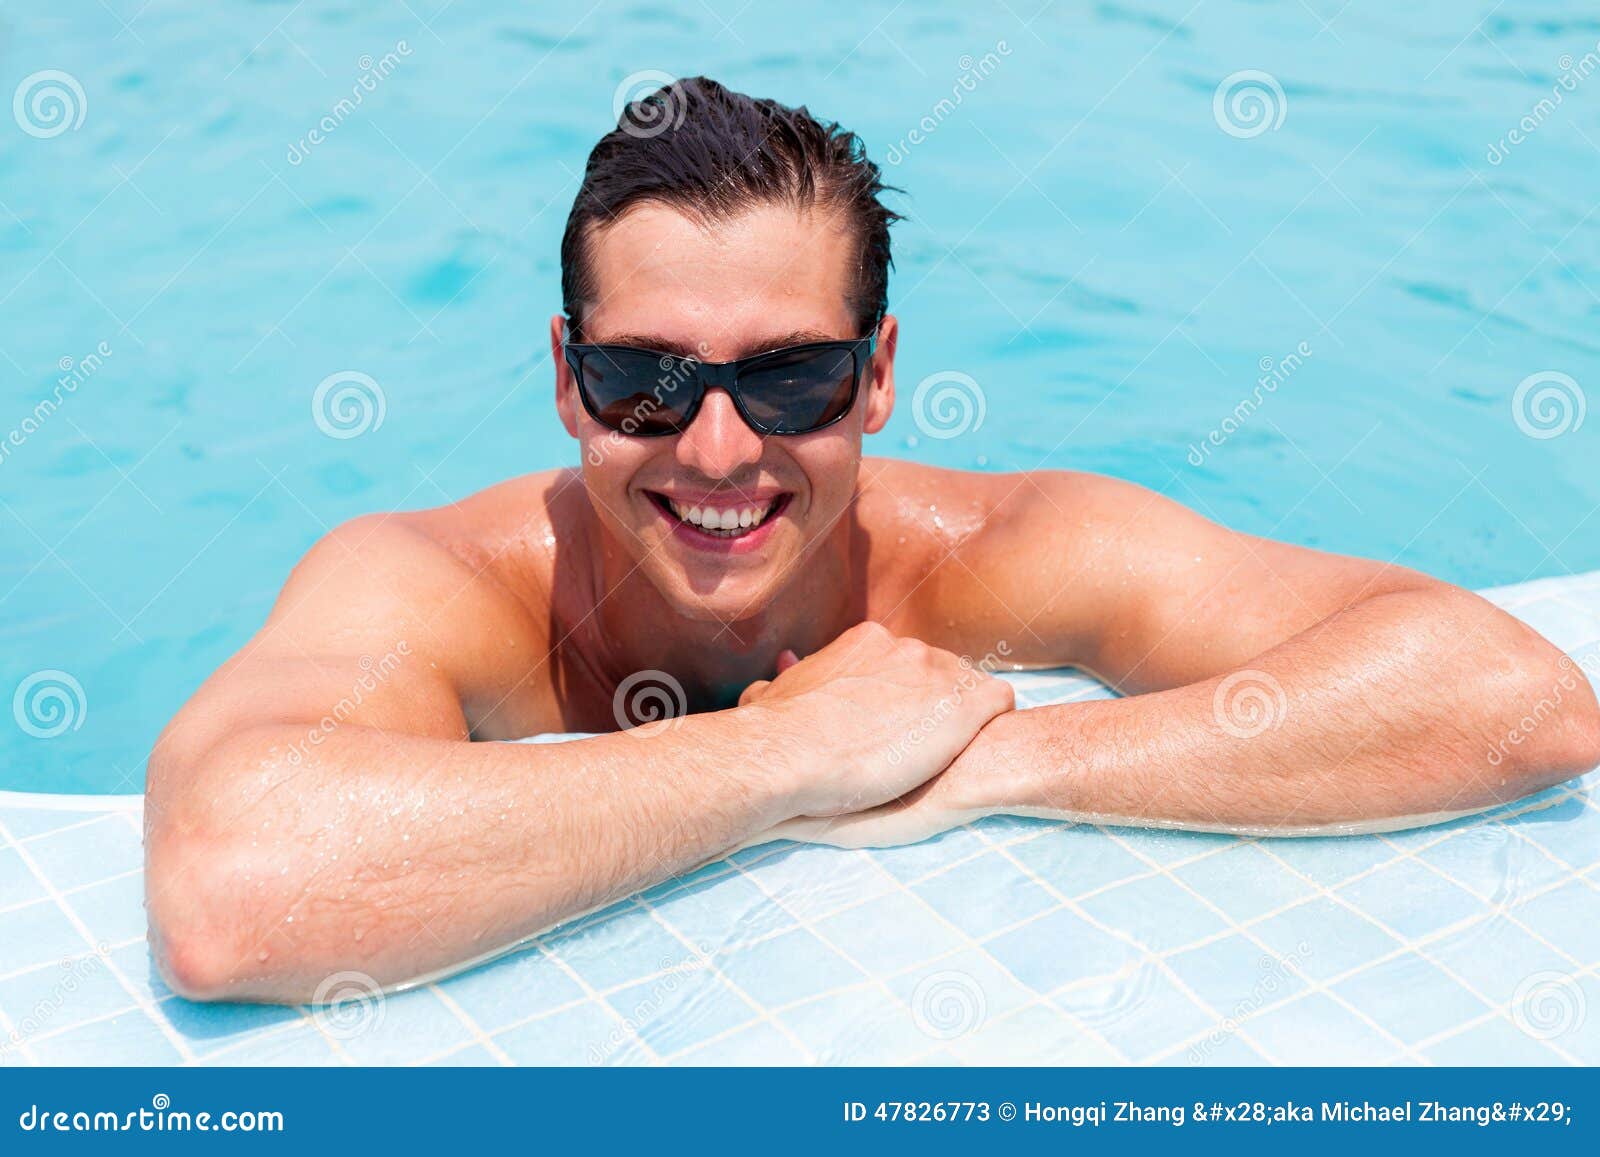 Premium Photo | Portrait of a happy attractive muscular man posing in swimming  pool